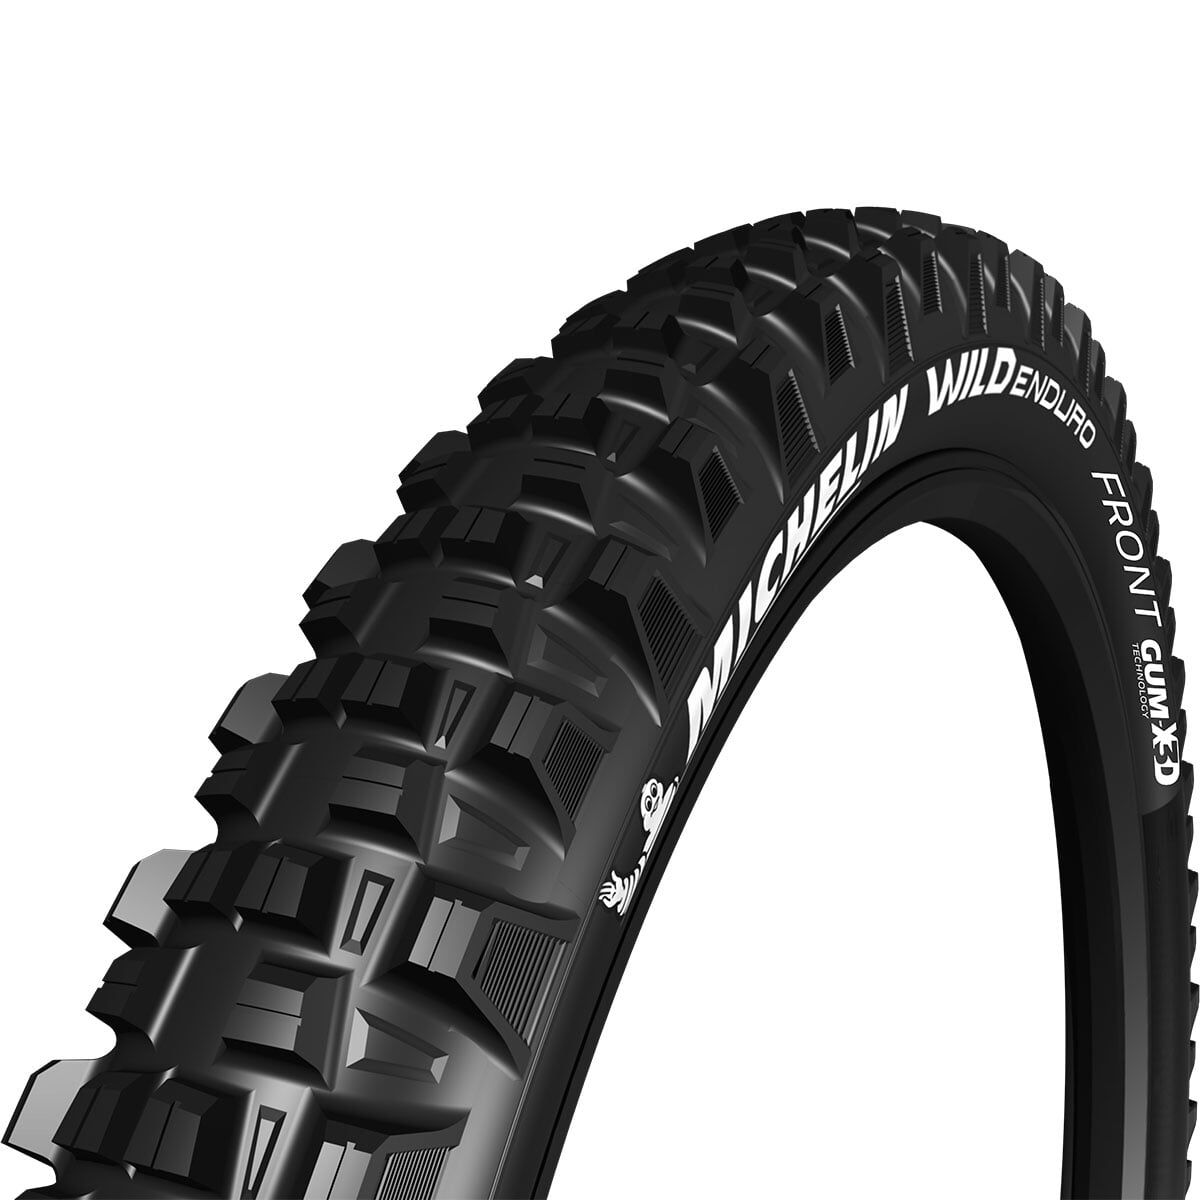 MICHELIN WILD ENDURO FRONT 27,5"X2.40 COMPETITION LINE KEVLAR GUM-X3D TS TLR